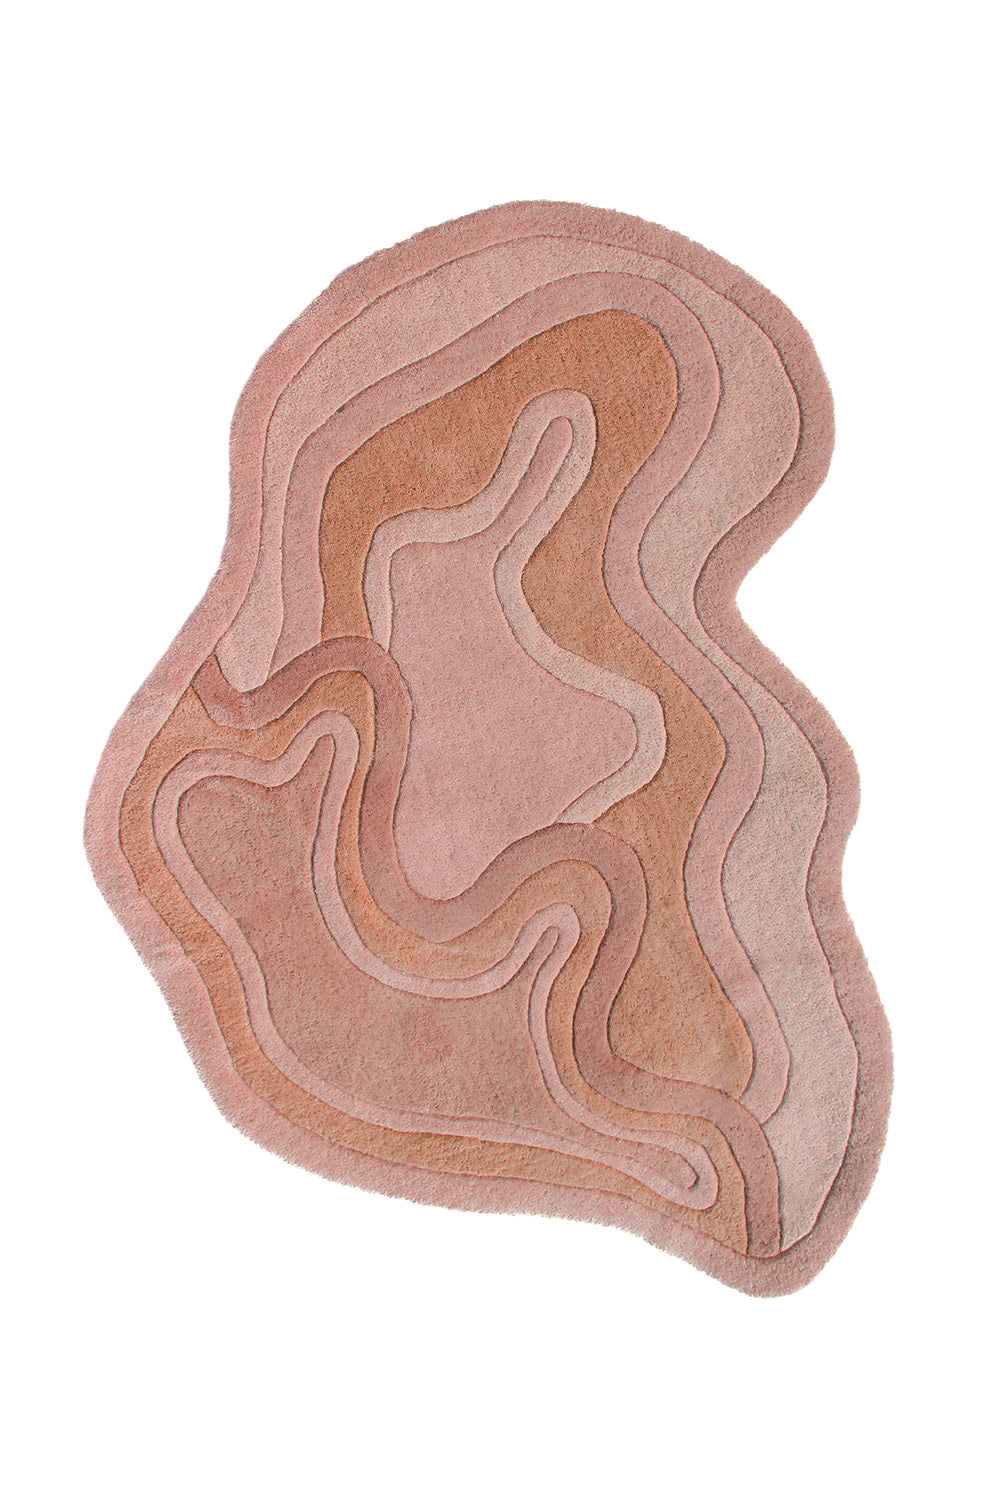 Modern Rust Rolling Tides Funky Shaped Rug - Warm and Inviting for Contemporary Homes